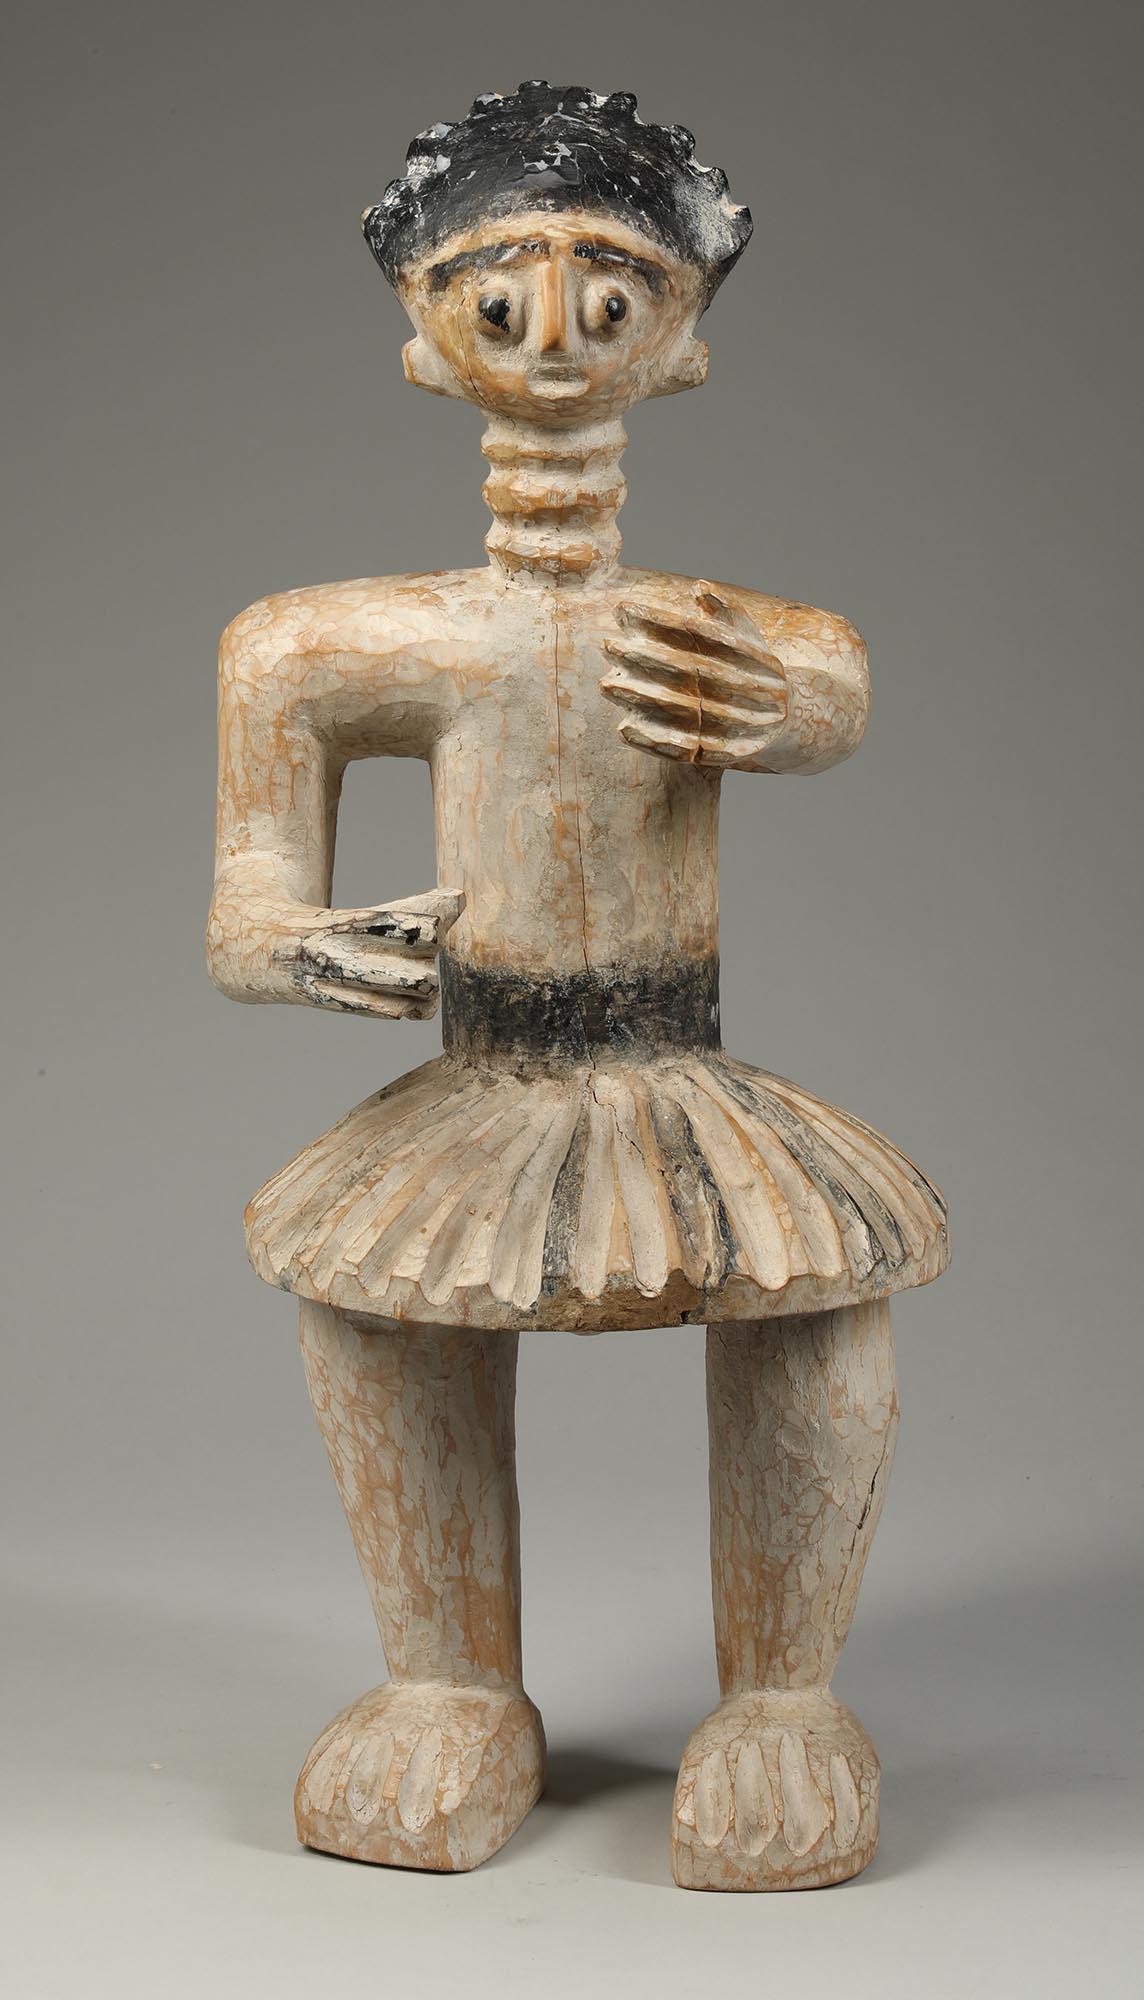 A Fante Drum Attendant standing male figure with flaring skirt and one arm out front. Bright open eye expression. From Ghana, early 20th century. As a display during traditional drumming performances and ceremonies in Ghana, carved wood figures are